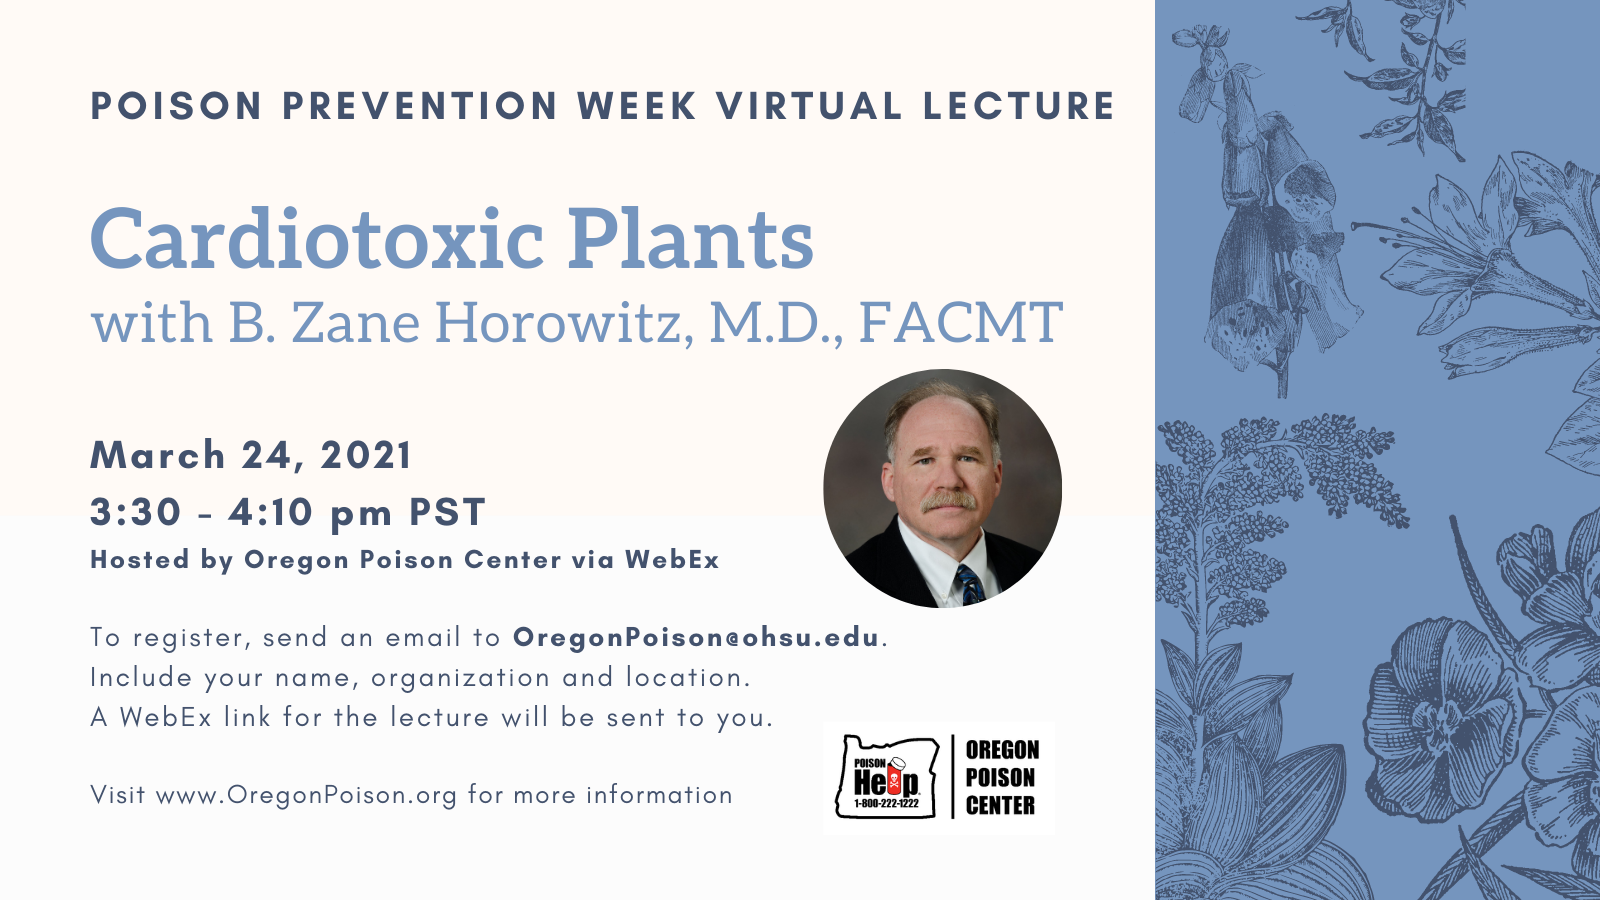 A virtual lecture hosted by Oregon Poison Center on Cardiotoxic plants with B. Zane Horowitz, M.D., FACMT advertised with drawings of cardiotoxic plants a photo of the lecturer